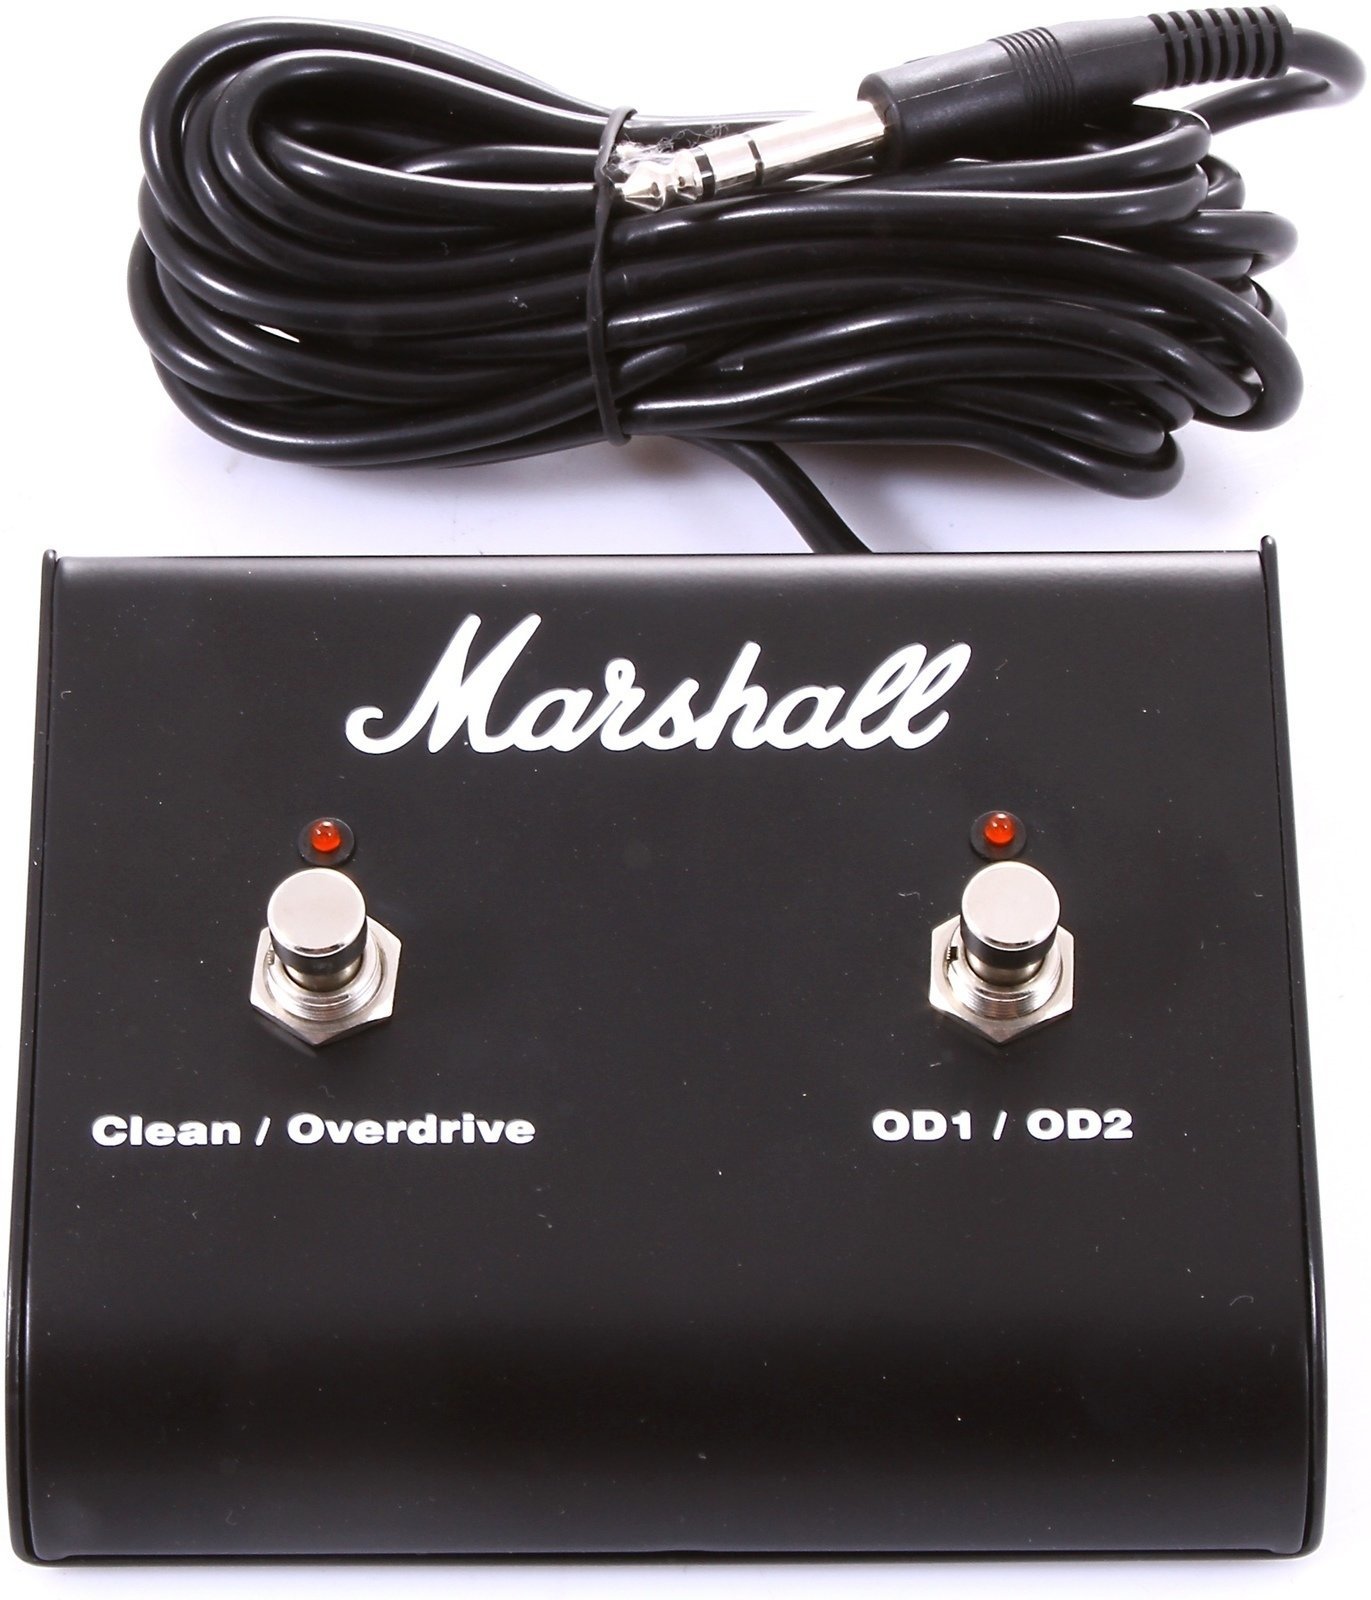 Footswitch Marshall PEDL 10013 Footswitch Dual-LED